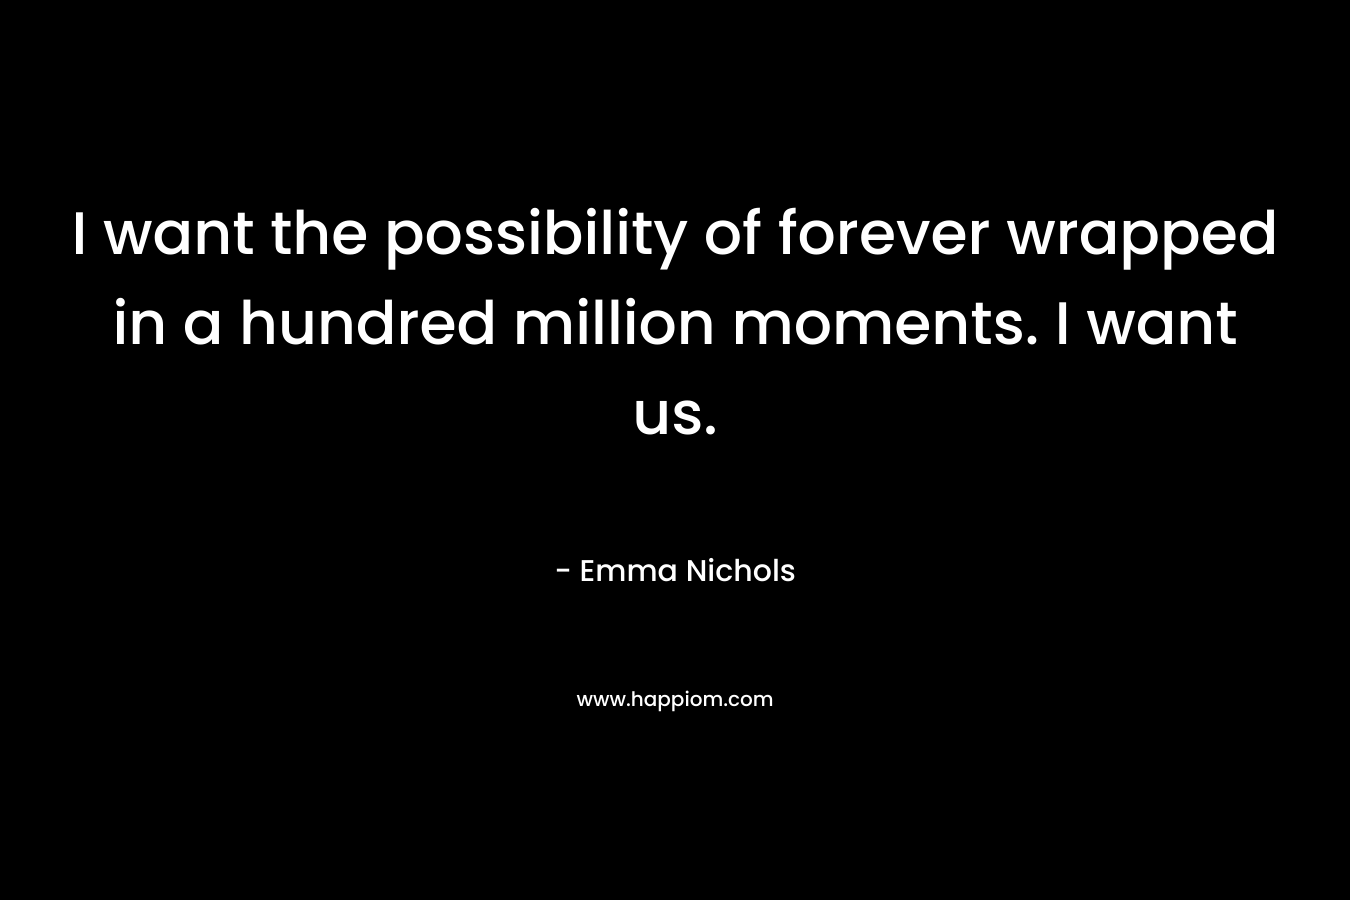 I want the possibility of forever wrapped in a hundred million moments. I want us. – Emma Nichols